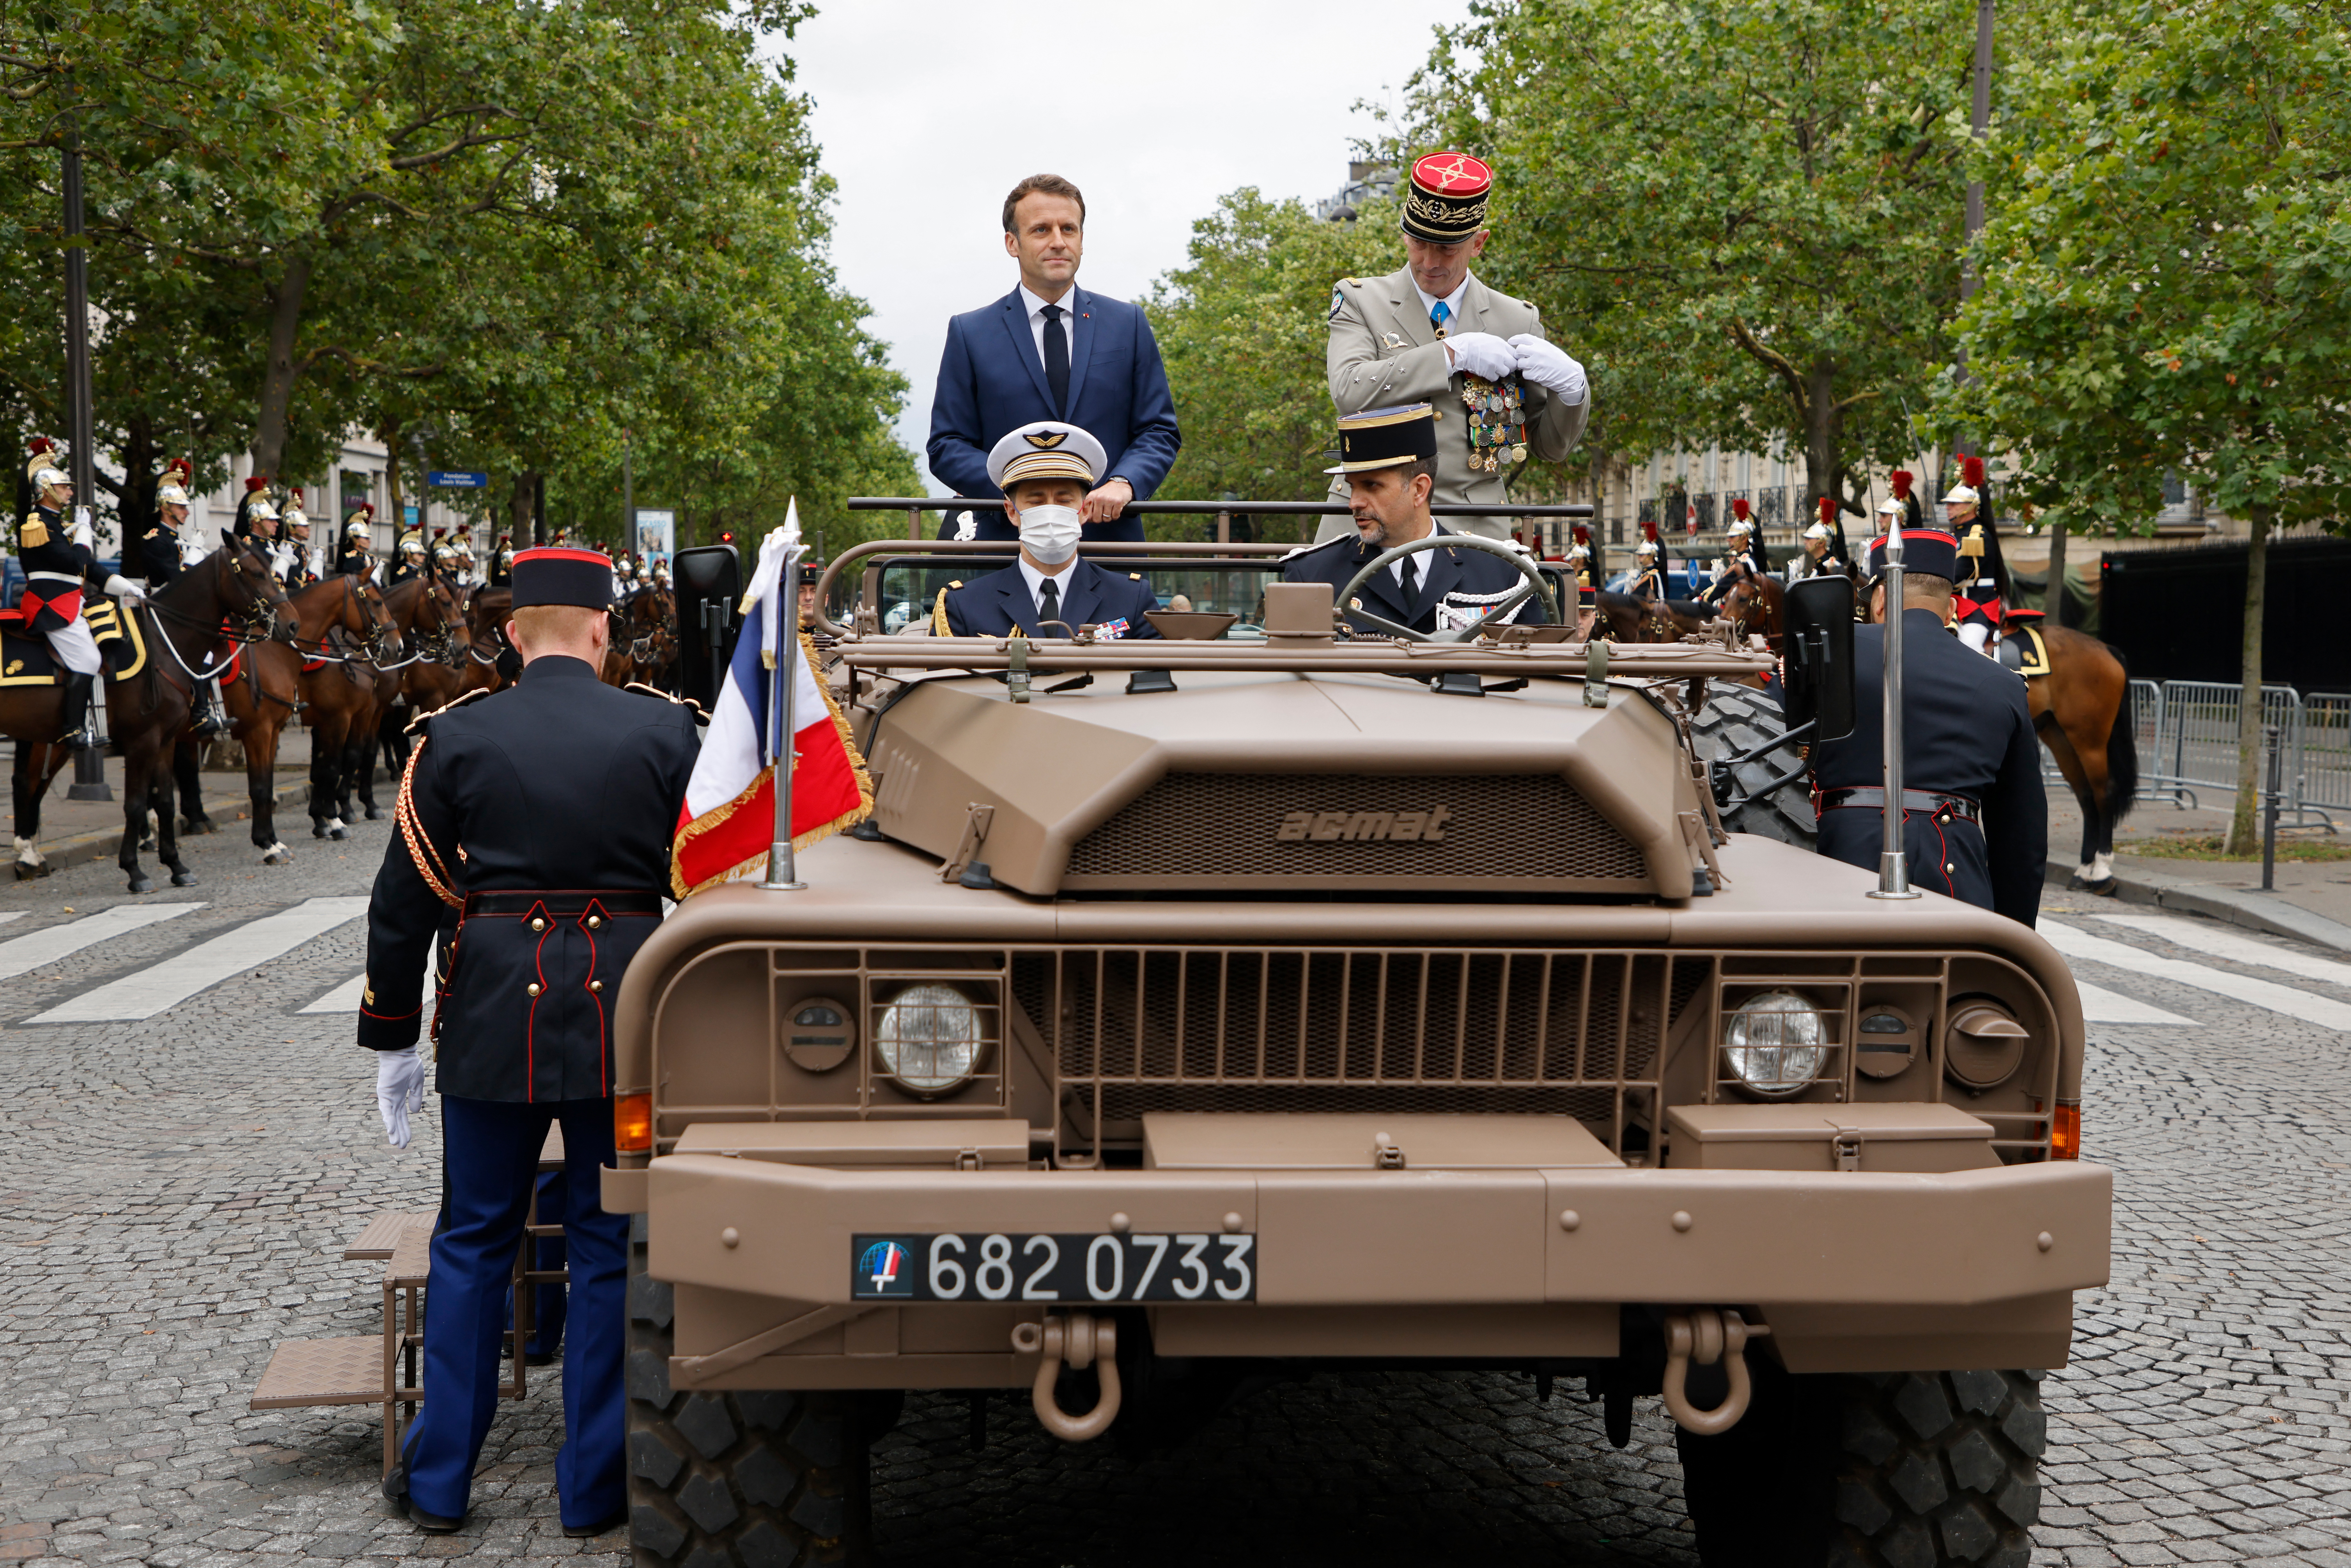 French President Emmanuel Macron and French Armies Chief of Staff General Francois Lecointre stand in the command car prior to review troops during the annual Bastille Day military parade on the Champs-Elysees avenue in Paris on July 14, 2021. (Photo by Ludovic MARIN / POOL / AFP)